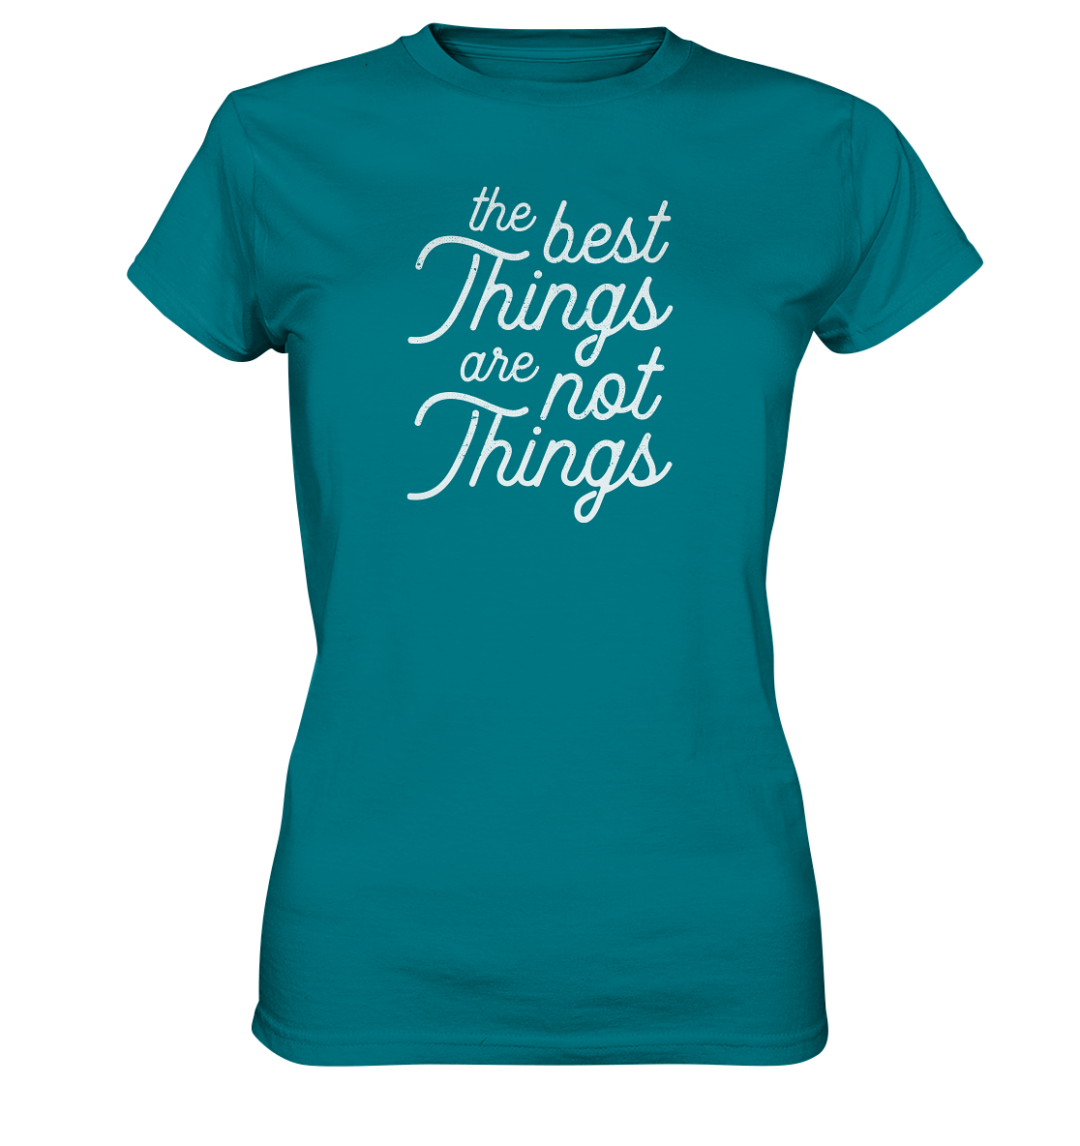 front ladies premium shirt 007885 1116x 1 The Best Things are Not Things - Ladies Premium Shirt